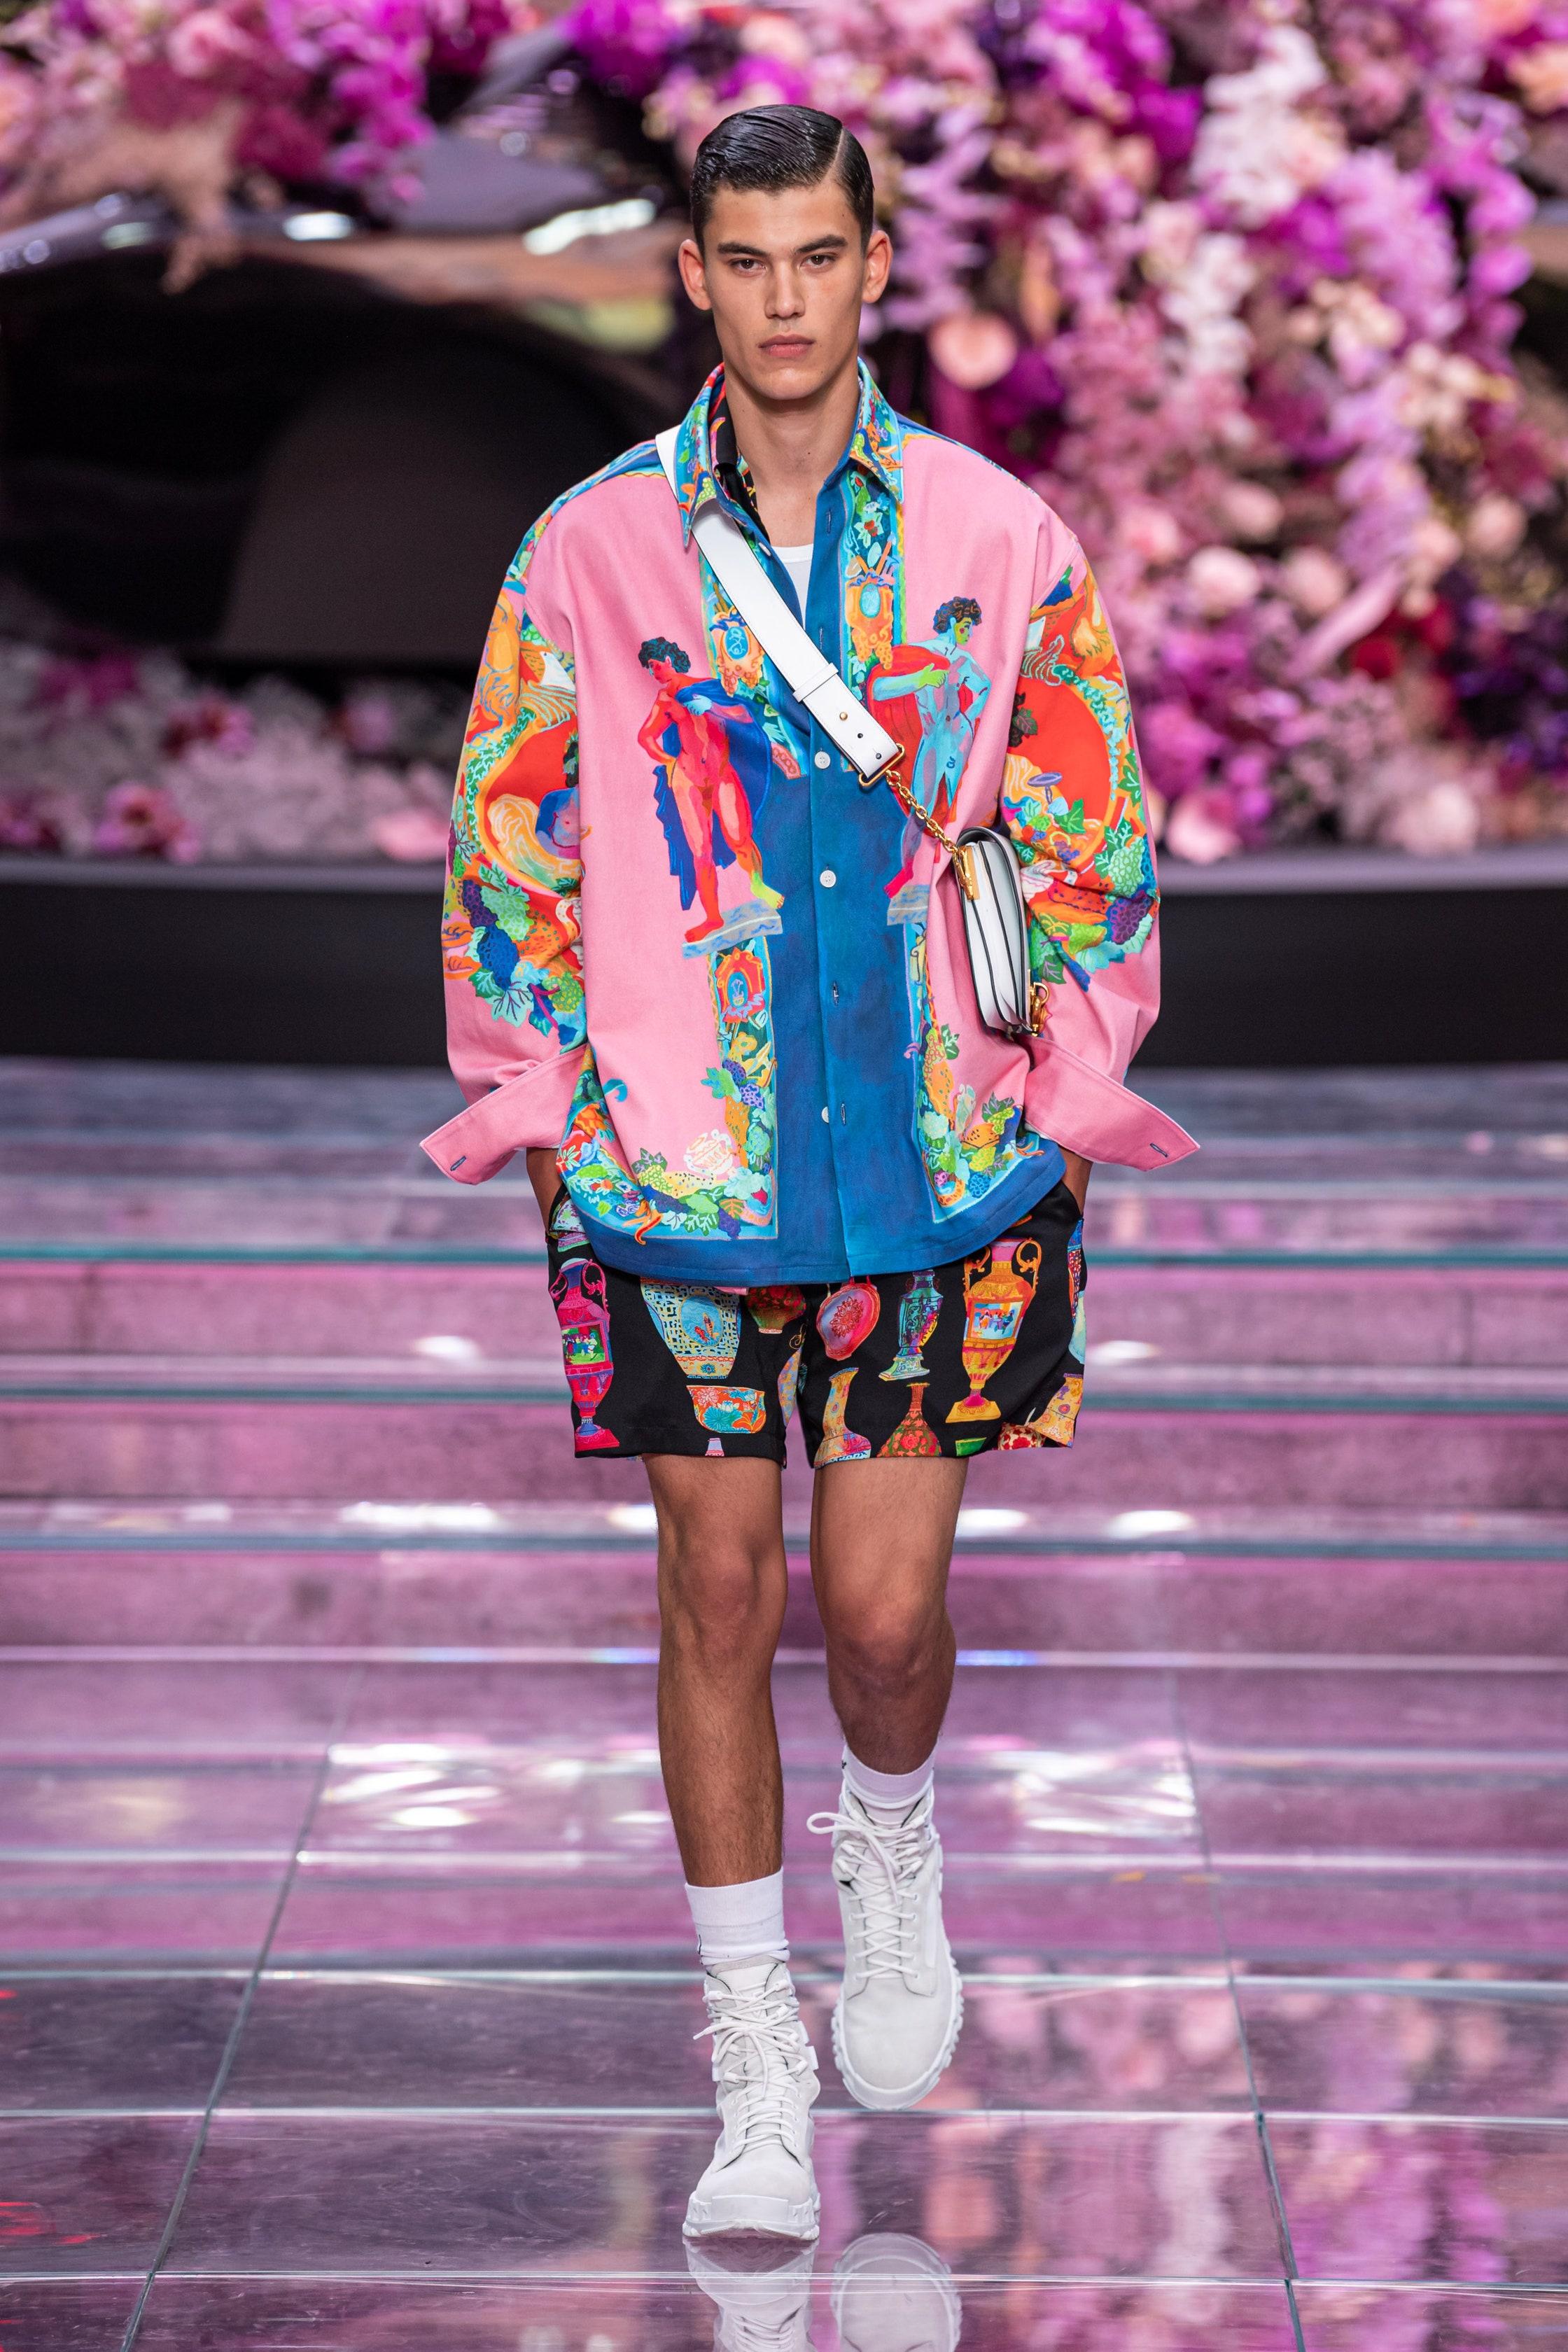 new VERSACE 2020 Runway Andy Dixon Caravaggio Archive pink silk shirt EU37 XS
Reference: TGAS/C00004
Brand: Versace
Designer: Donatella Versace
Collection: Spring Summer 2020 Runway
Material: Silk
Color: Pink
Pattern: Caraggio
Closure: Button
Extra